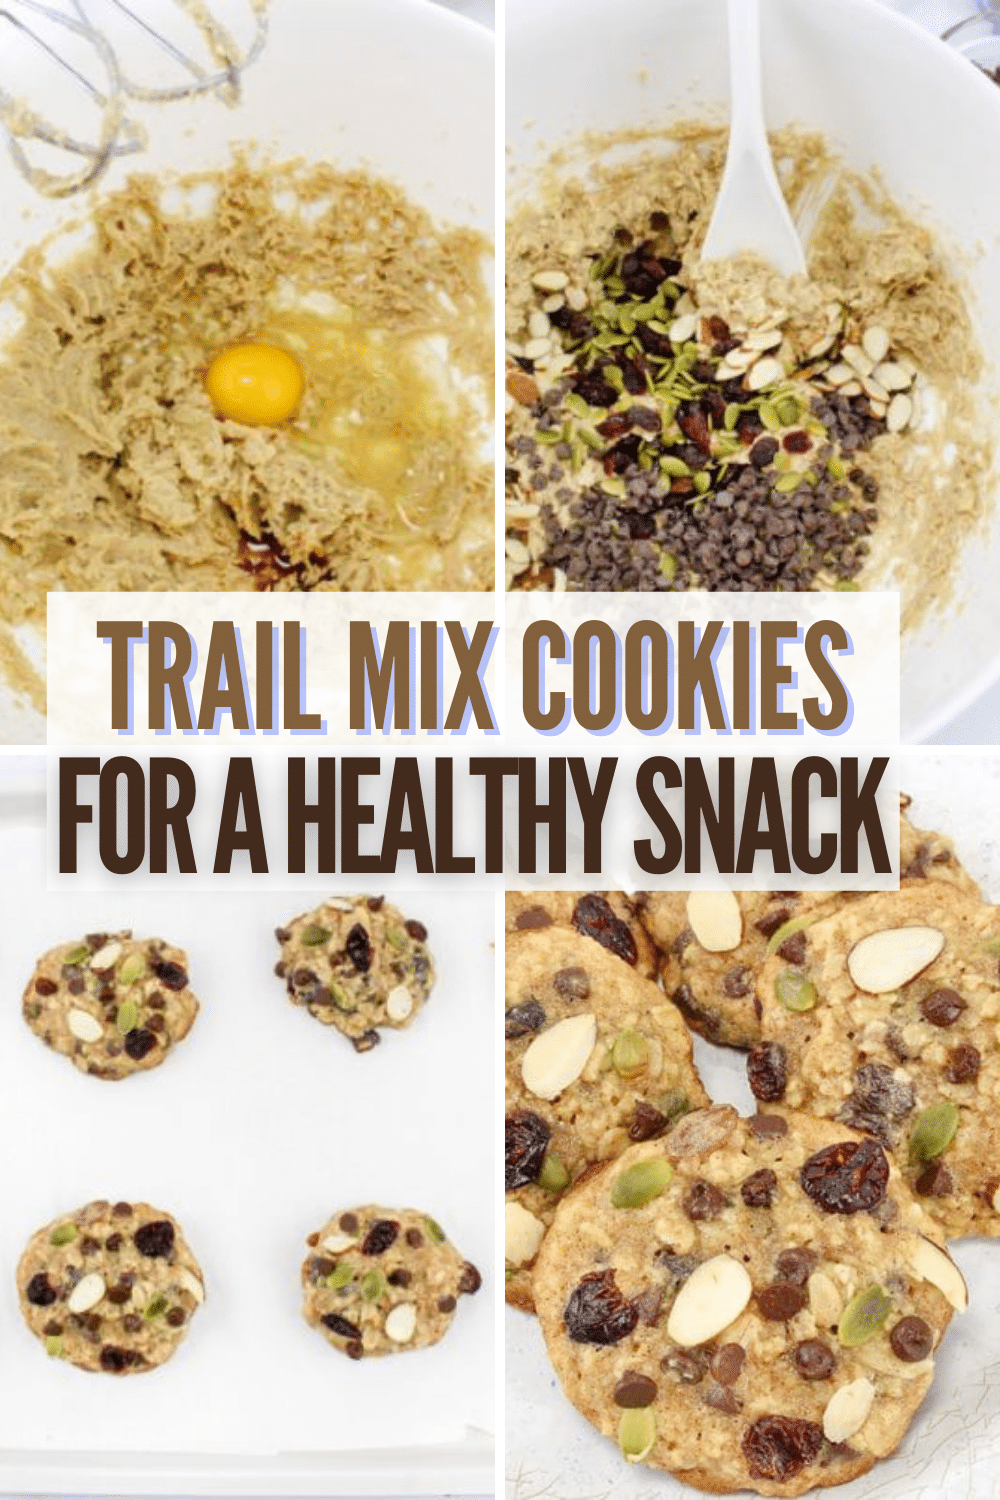 Are you looking for an easy healthy snack the kids will actually eat? Well, you will love this recipe for trail mix cookies! They’re the perfect simple oatmeal cookie - chewy, healthy, and a dessert food you can feel good about. #healthysnack #easyrecipe #kidapproved #trailmixrecipe #oatmealcookies via @wondermomwannab